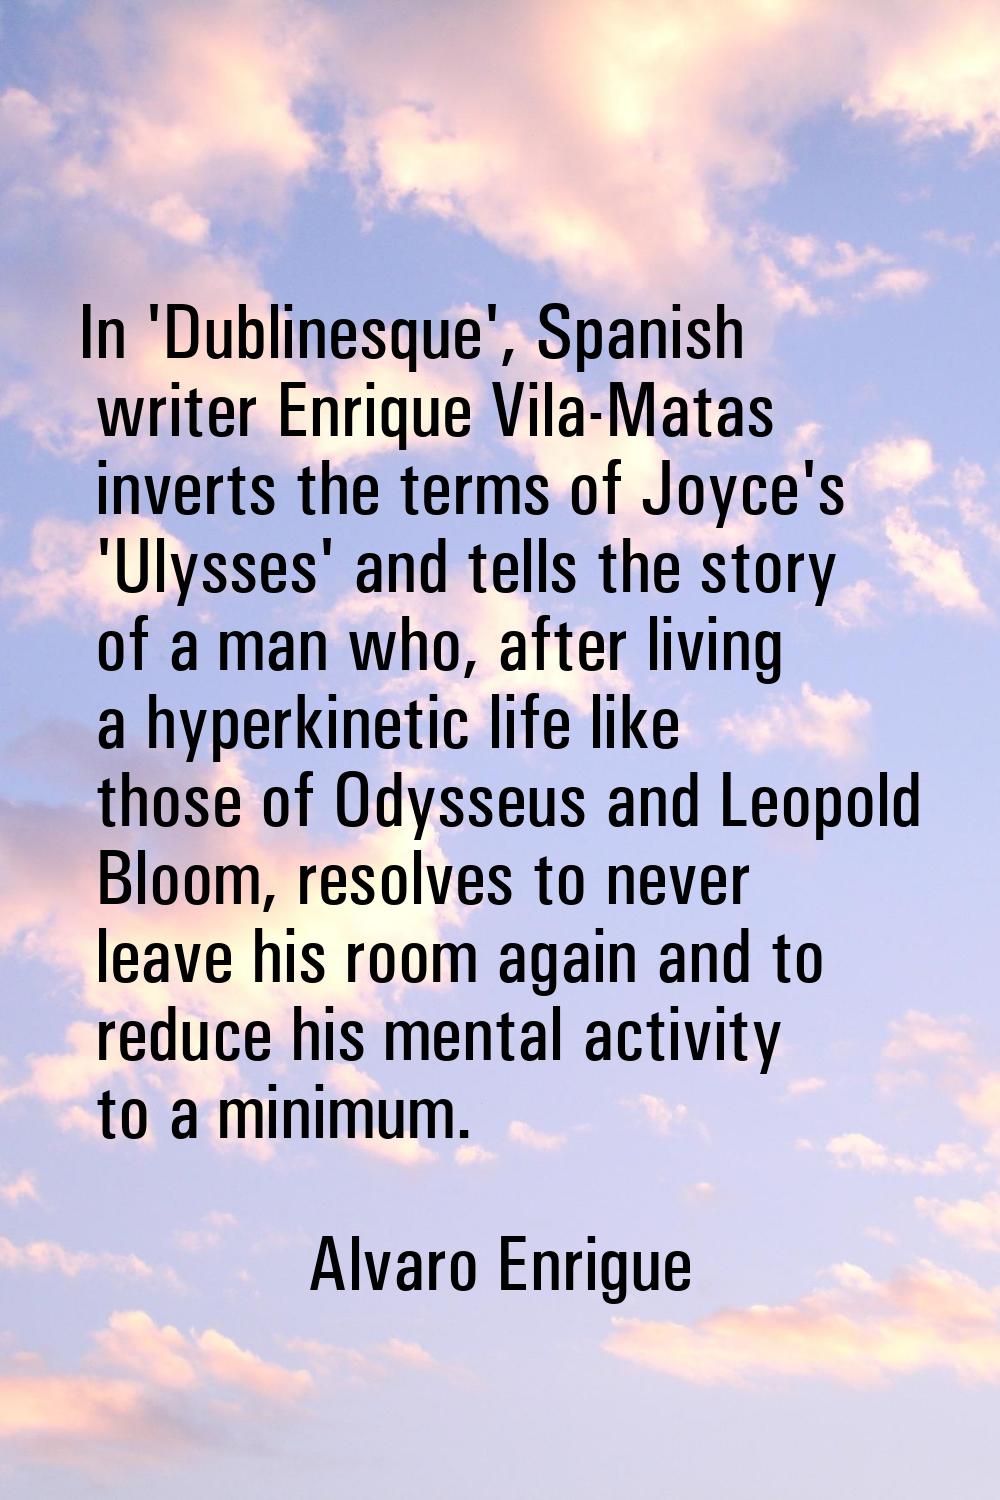 In 'Dublinesque', Spanish writer Enrique Vila-Matas inverts the terms of Joyce's 'Ulysses' and tell